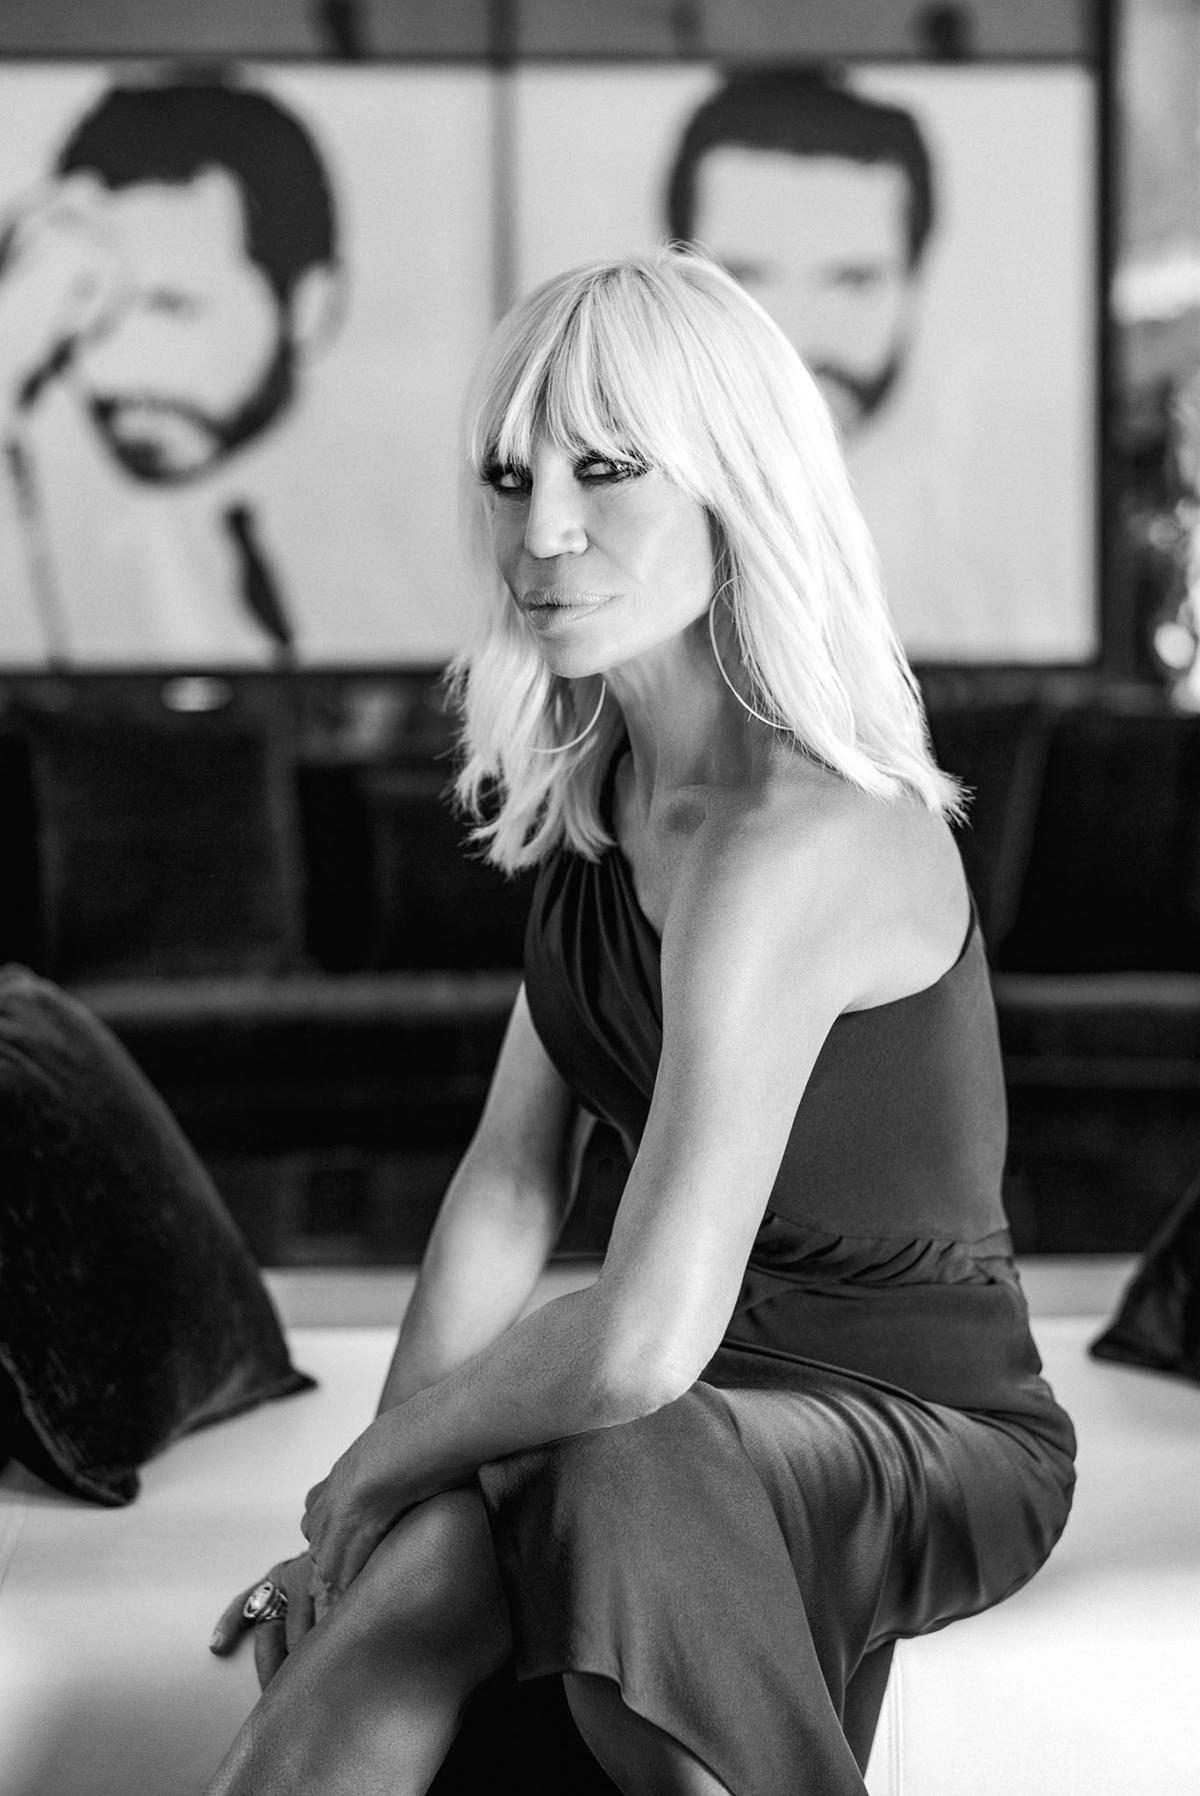 Donatella Versace as Seen by 12 Friends and Colleagues